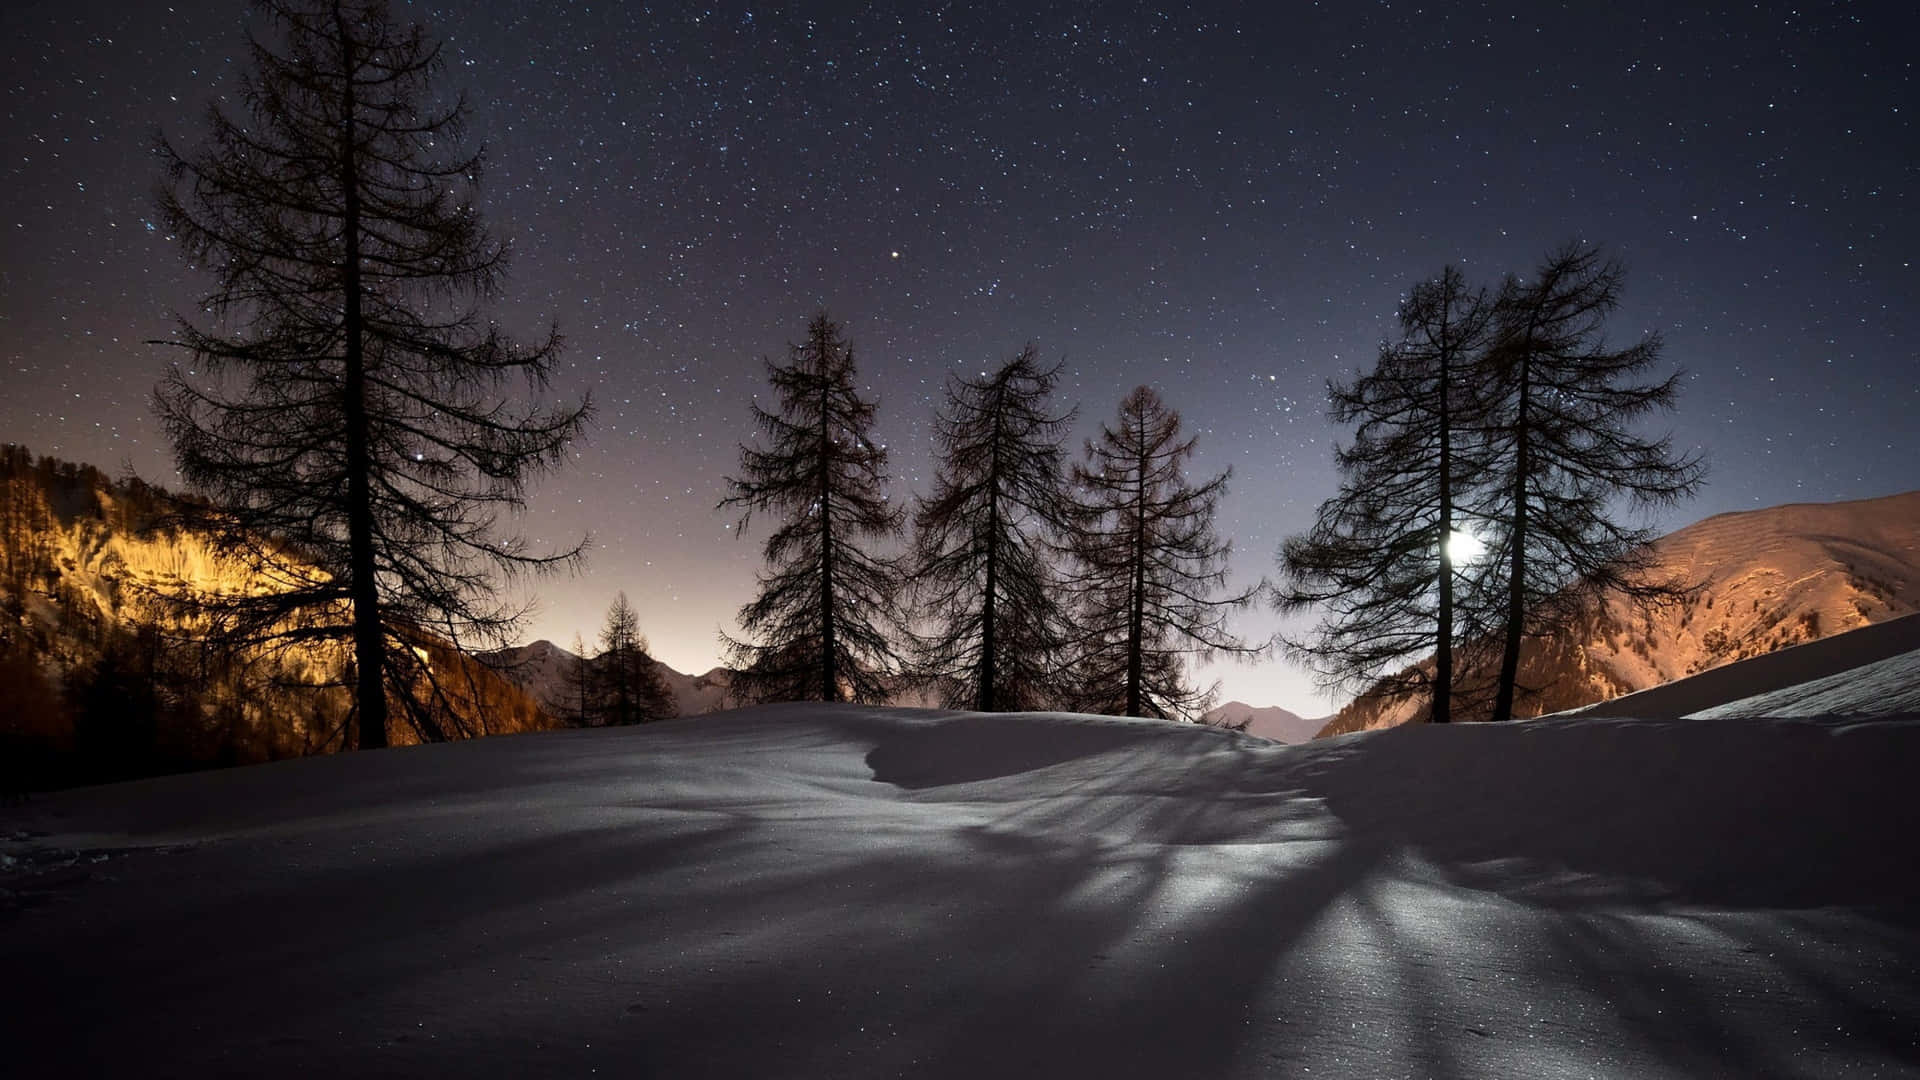 A Snow Covered Mountain With Trees And A Moon